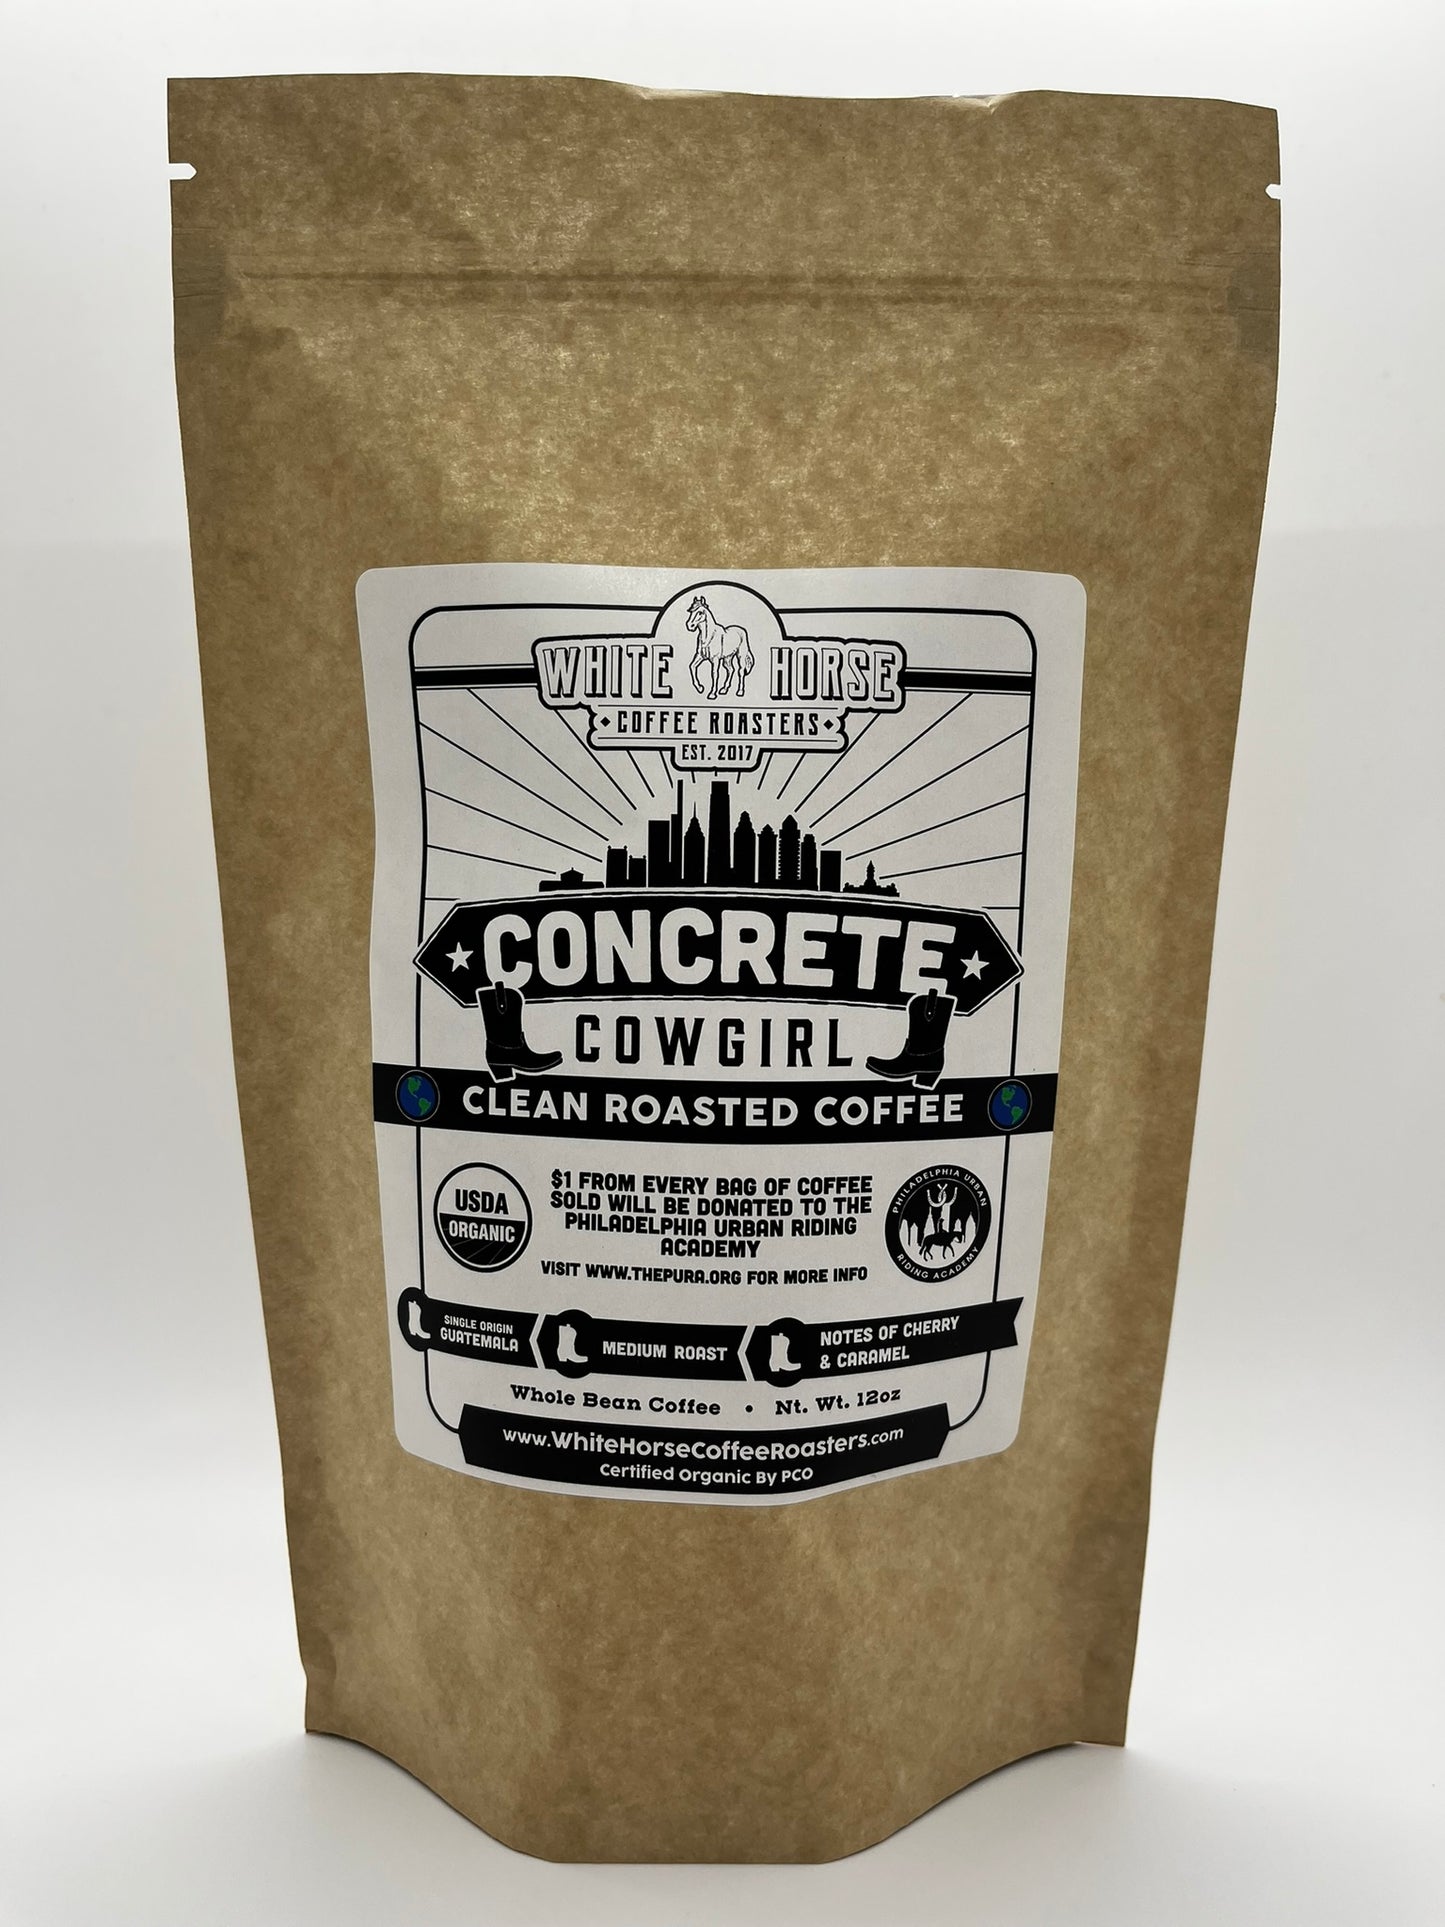 Concrete Cowgirl Roast Wholesale Wholesale - Source your coffee supply wholesale from White Horse Coffee Roasters for consistent quality in every batch.